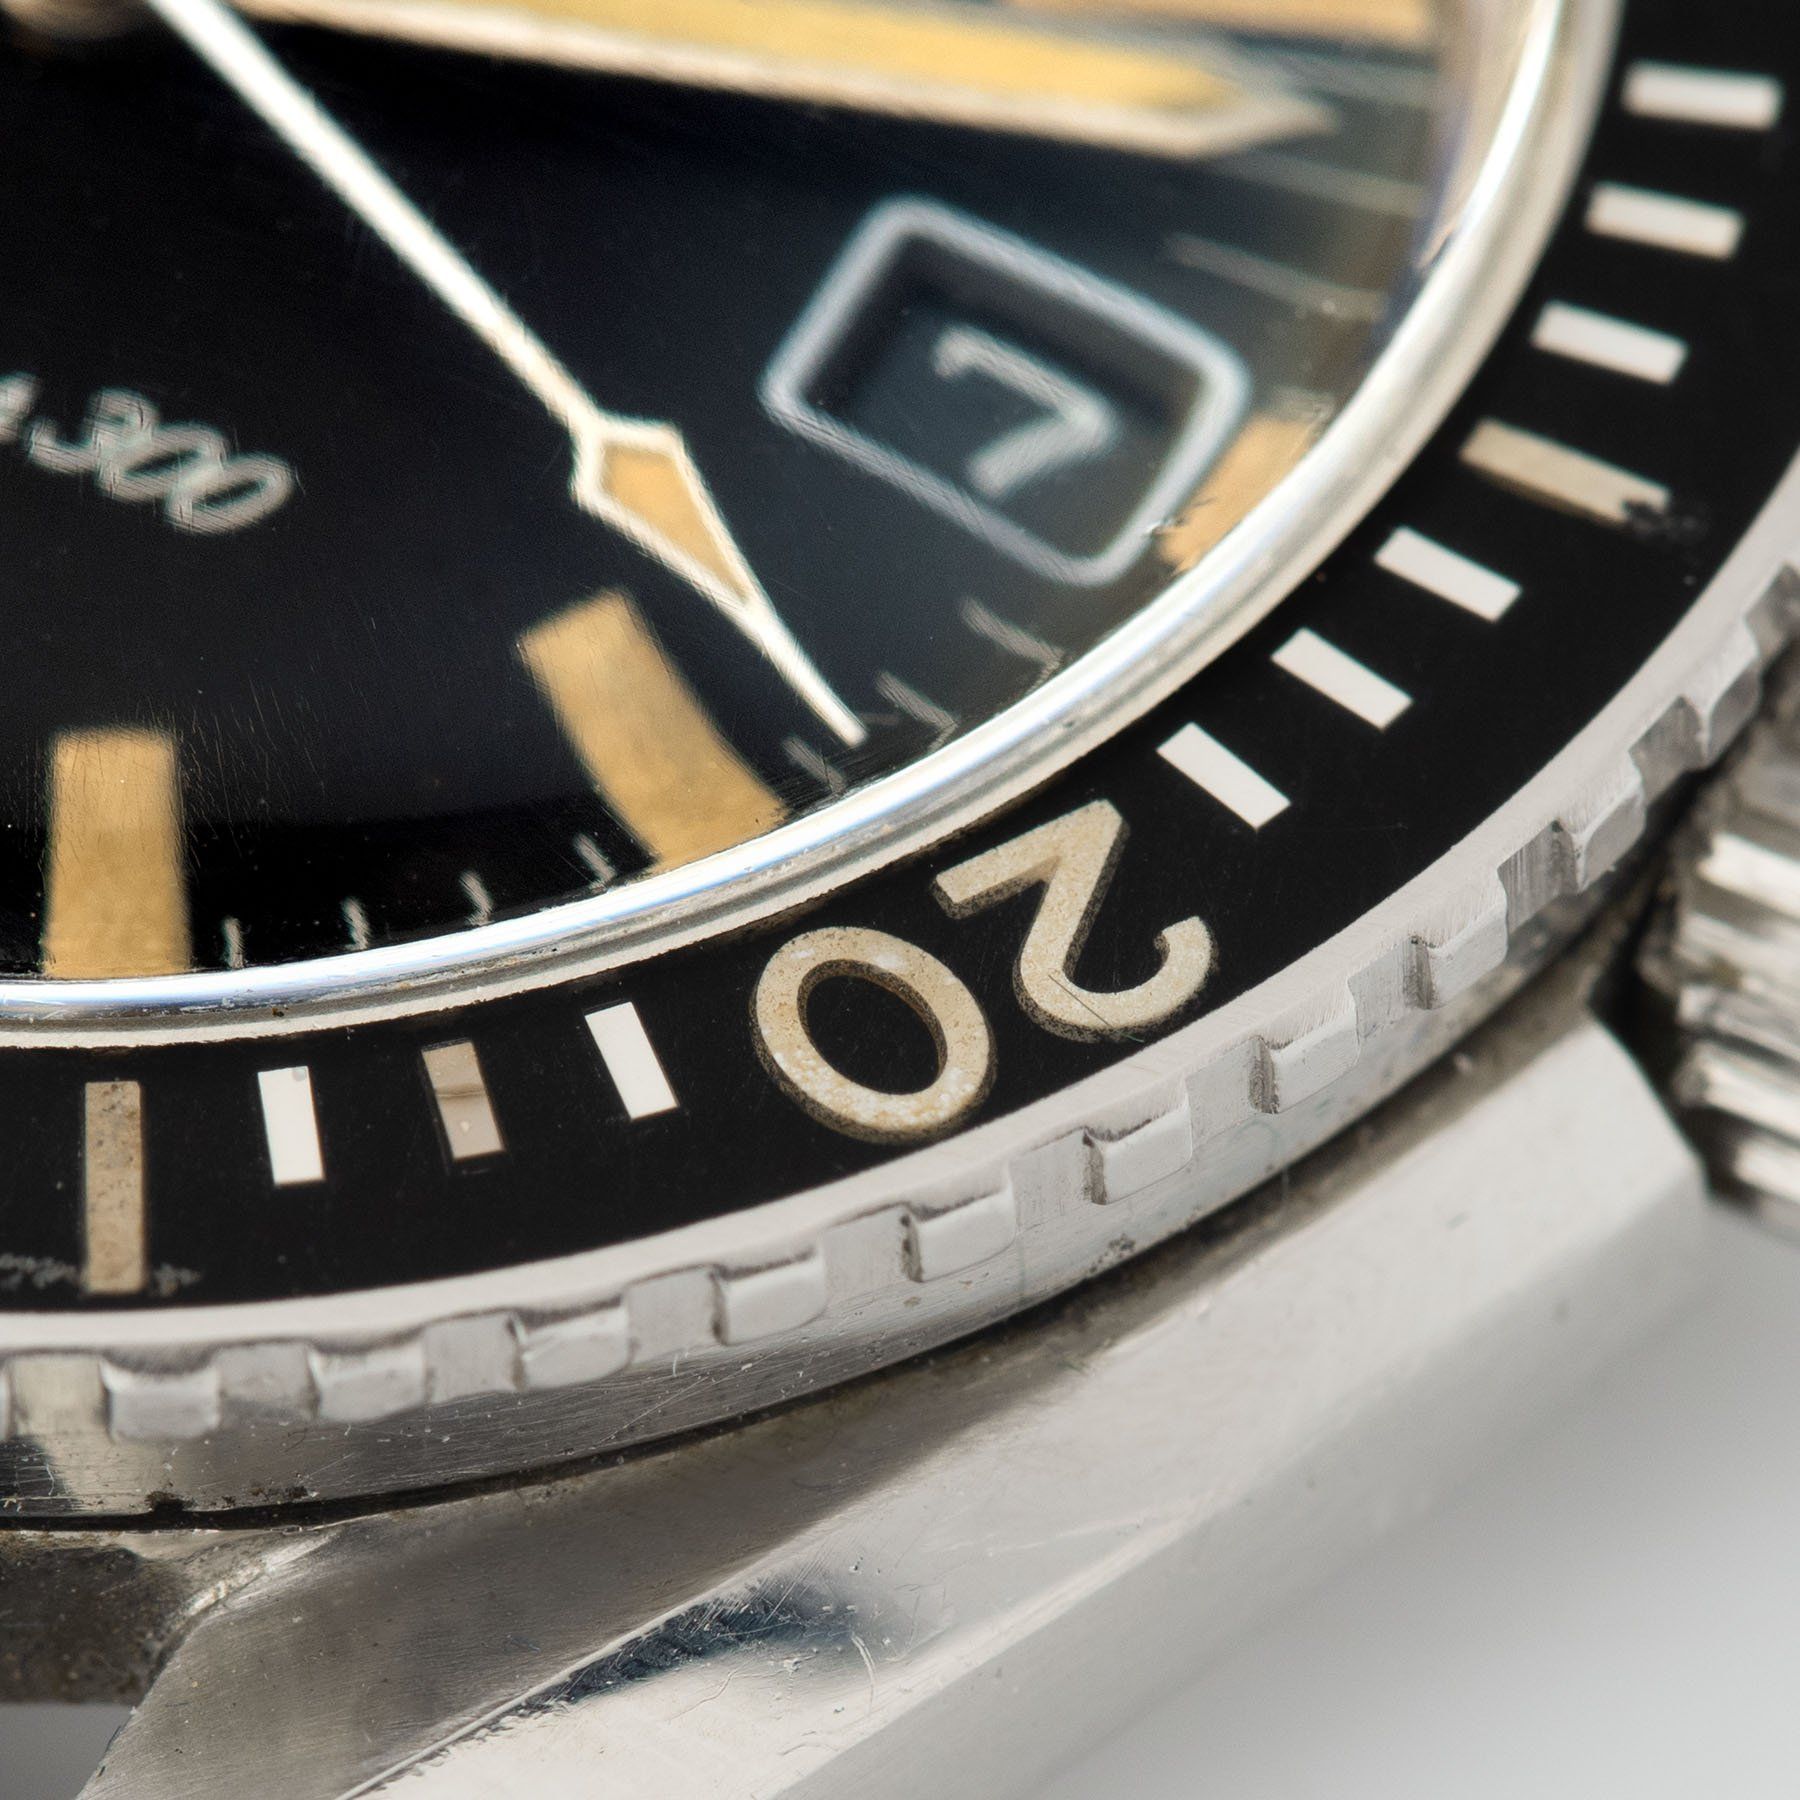 Omega Seamaster Date SM300 Reference 166.024